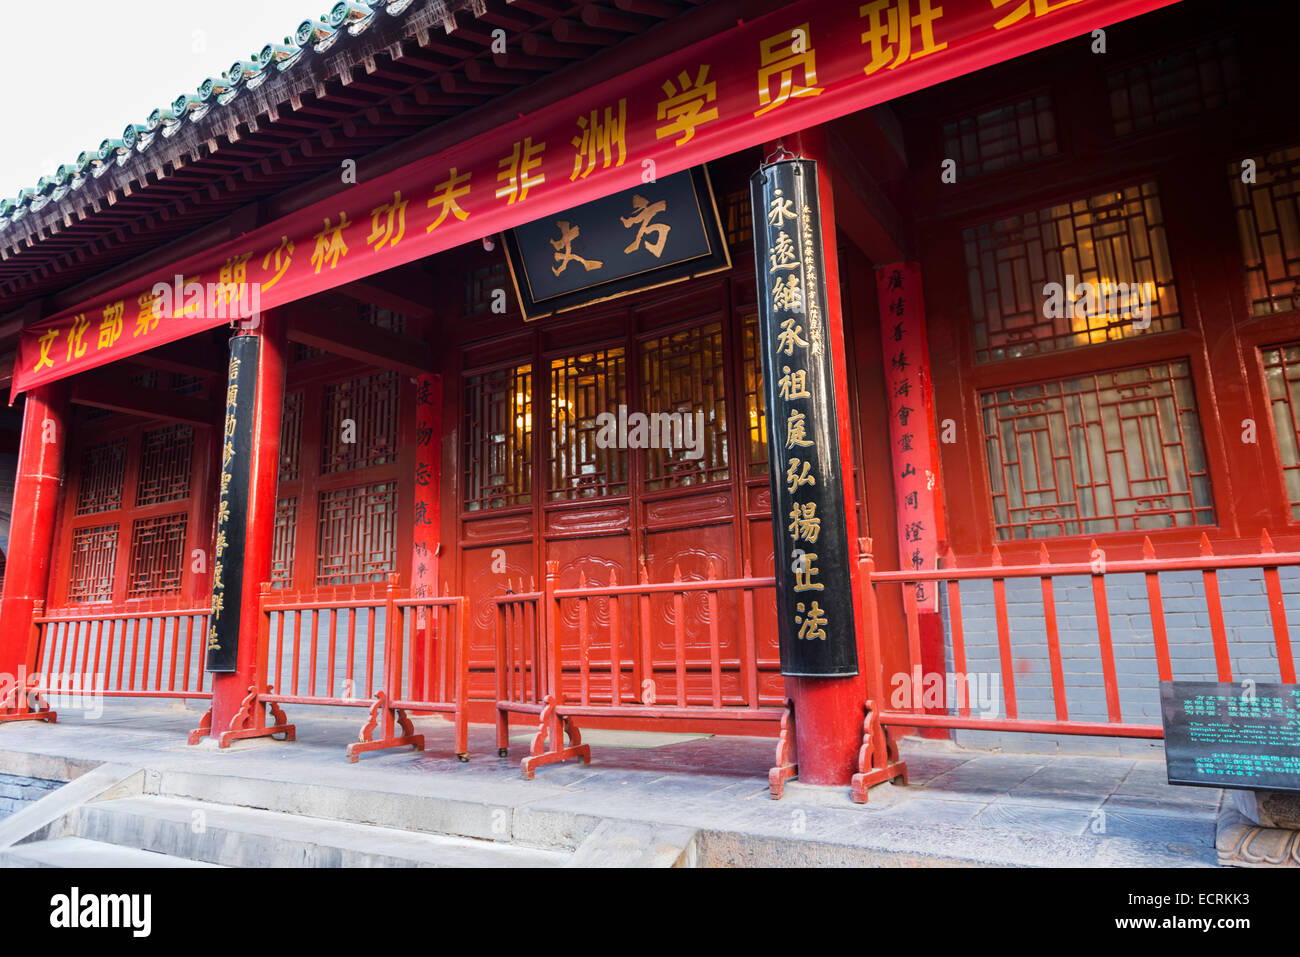 The abbot's room at the Shaolin Temple in DengFeng, Zhengzhou, Henan Province, China 2014 Stock Photo